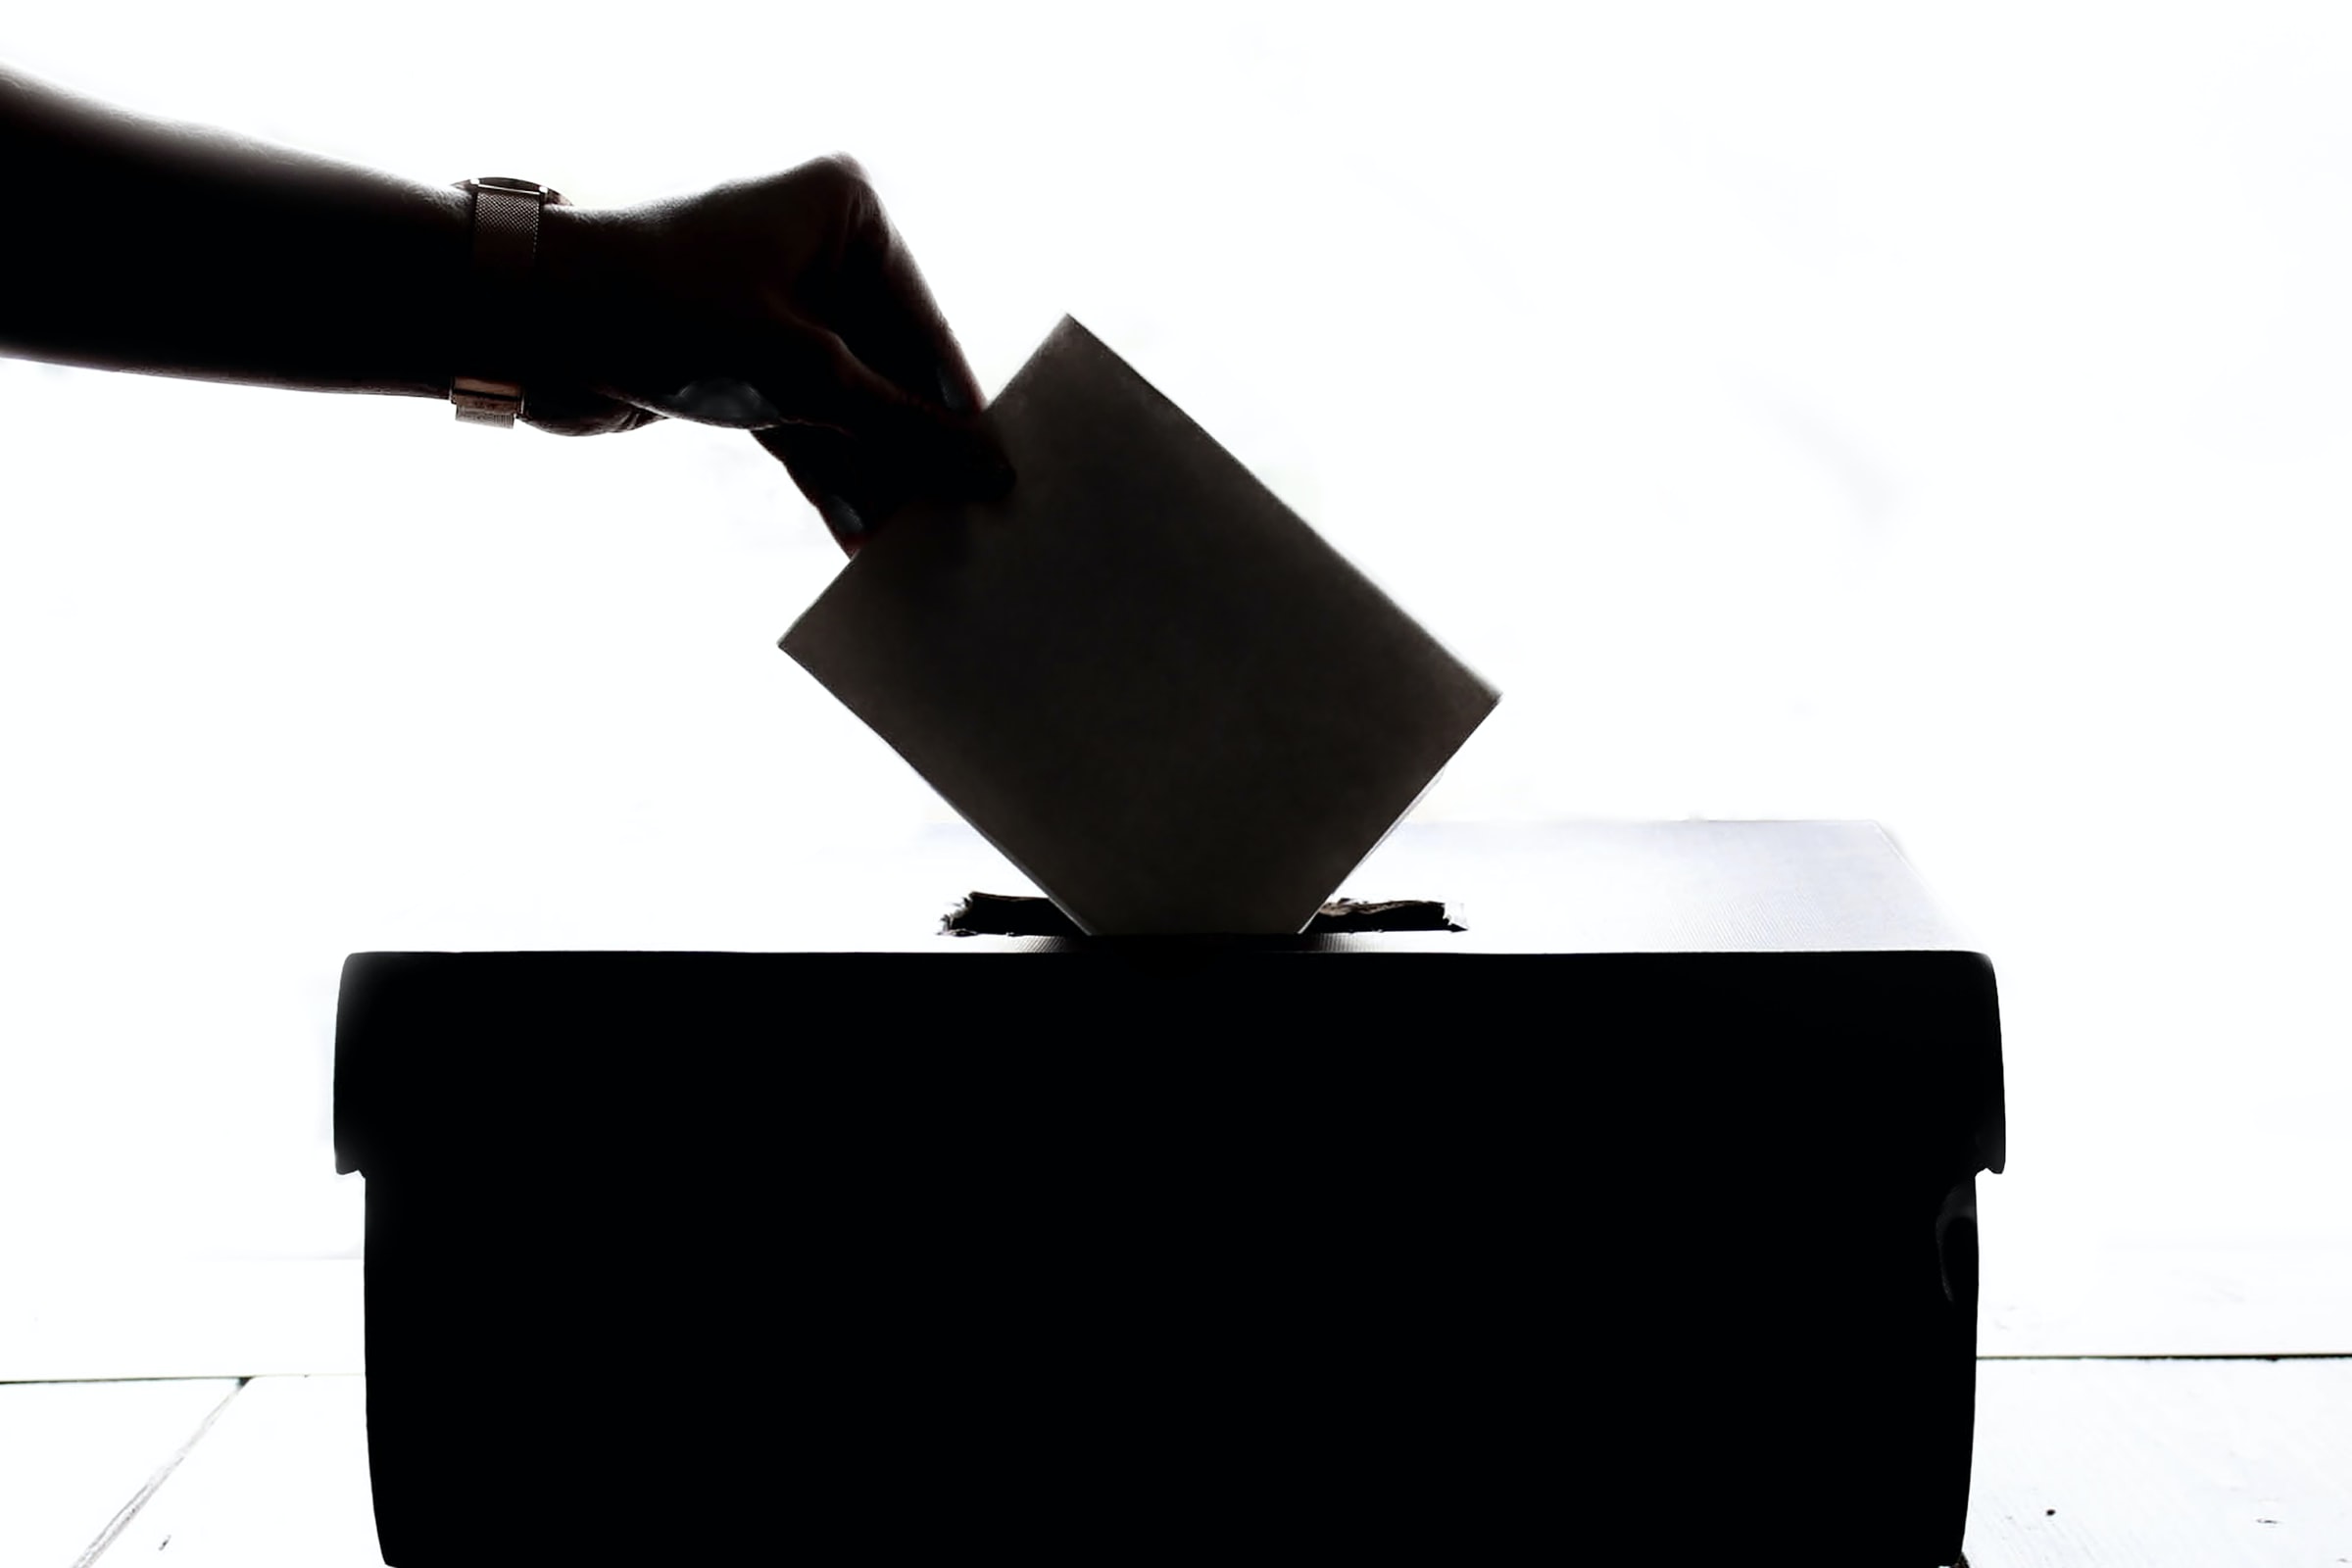 A silhouette of a person putting a vote in a ballot box.